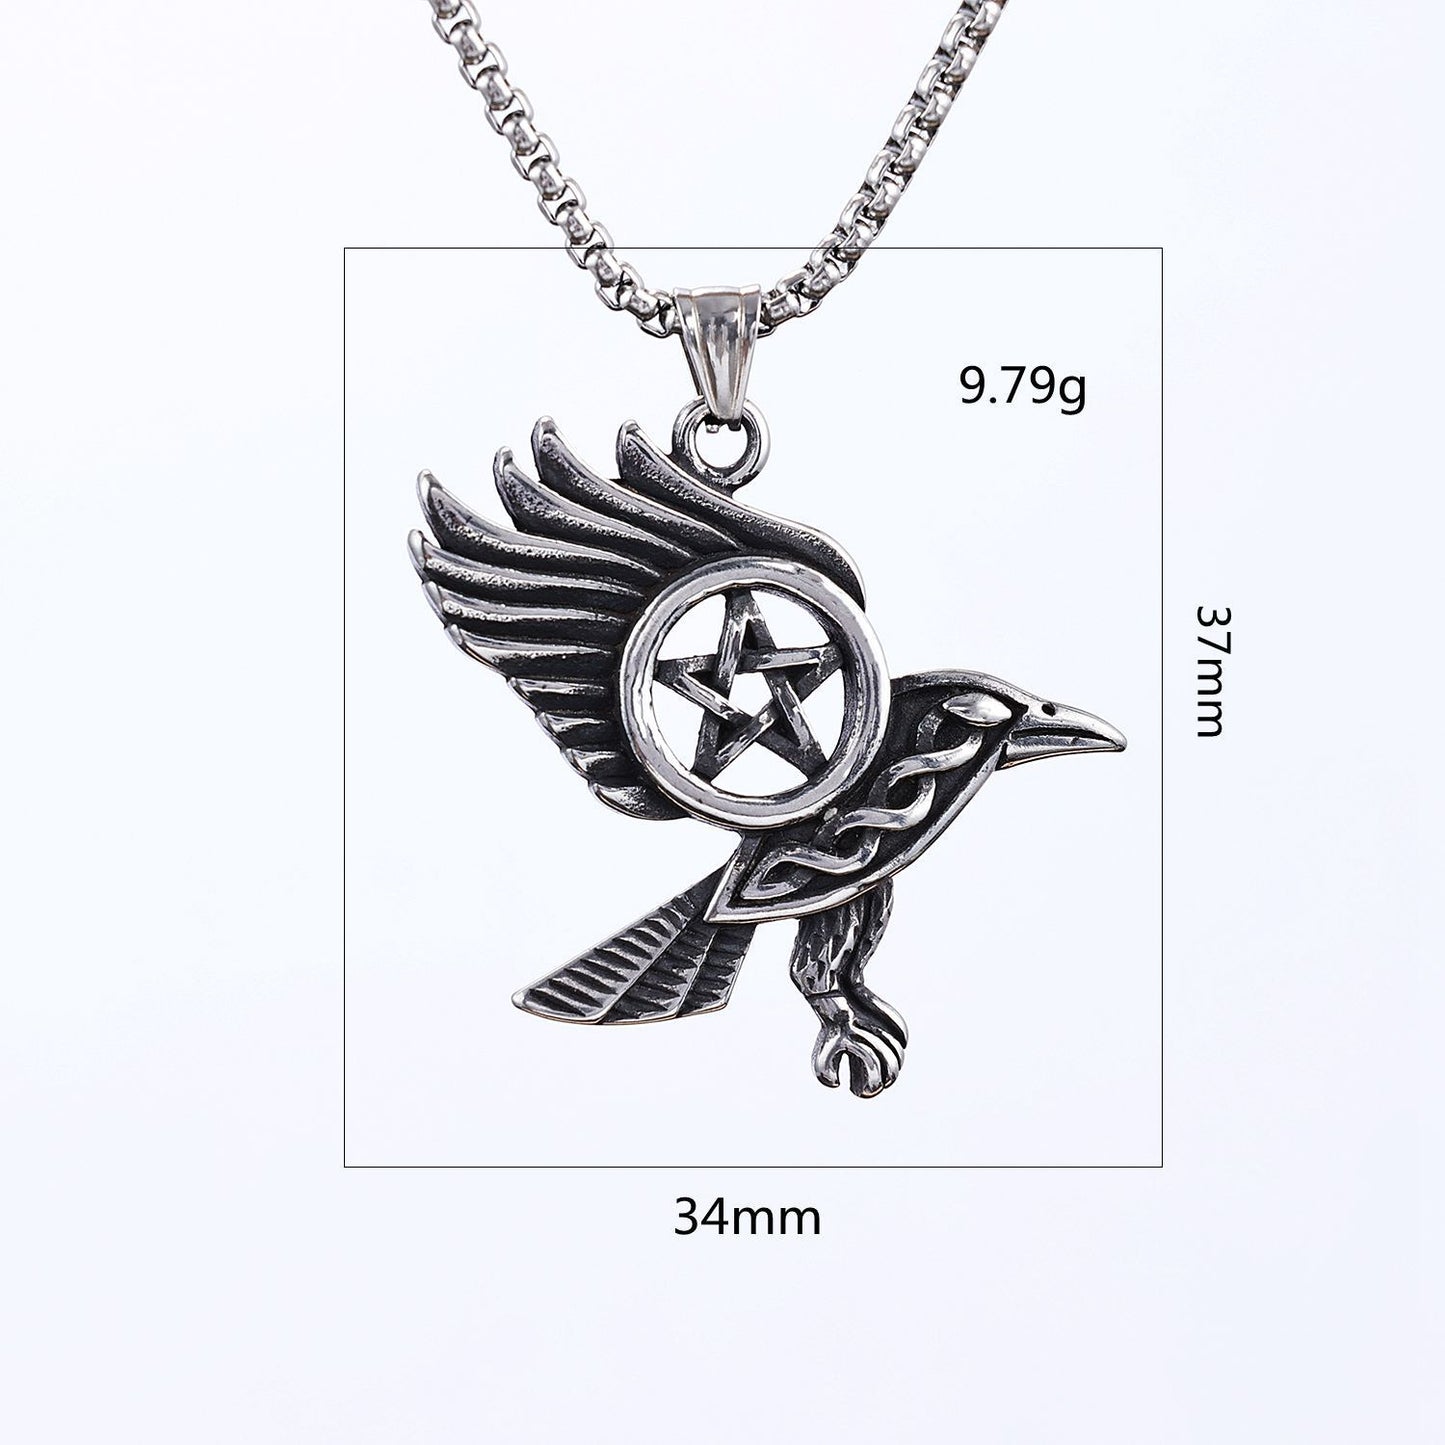 Majesty of the Soaring Skies Necklace